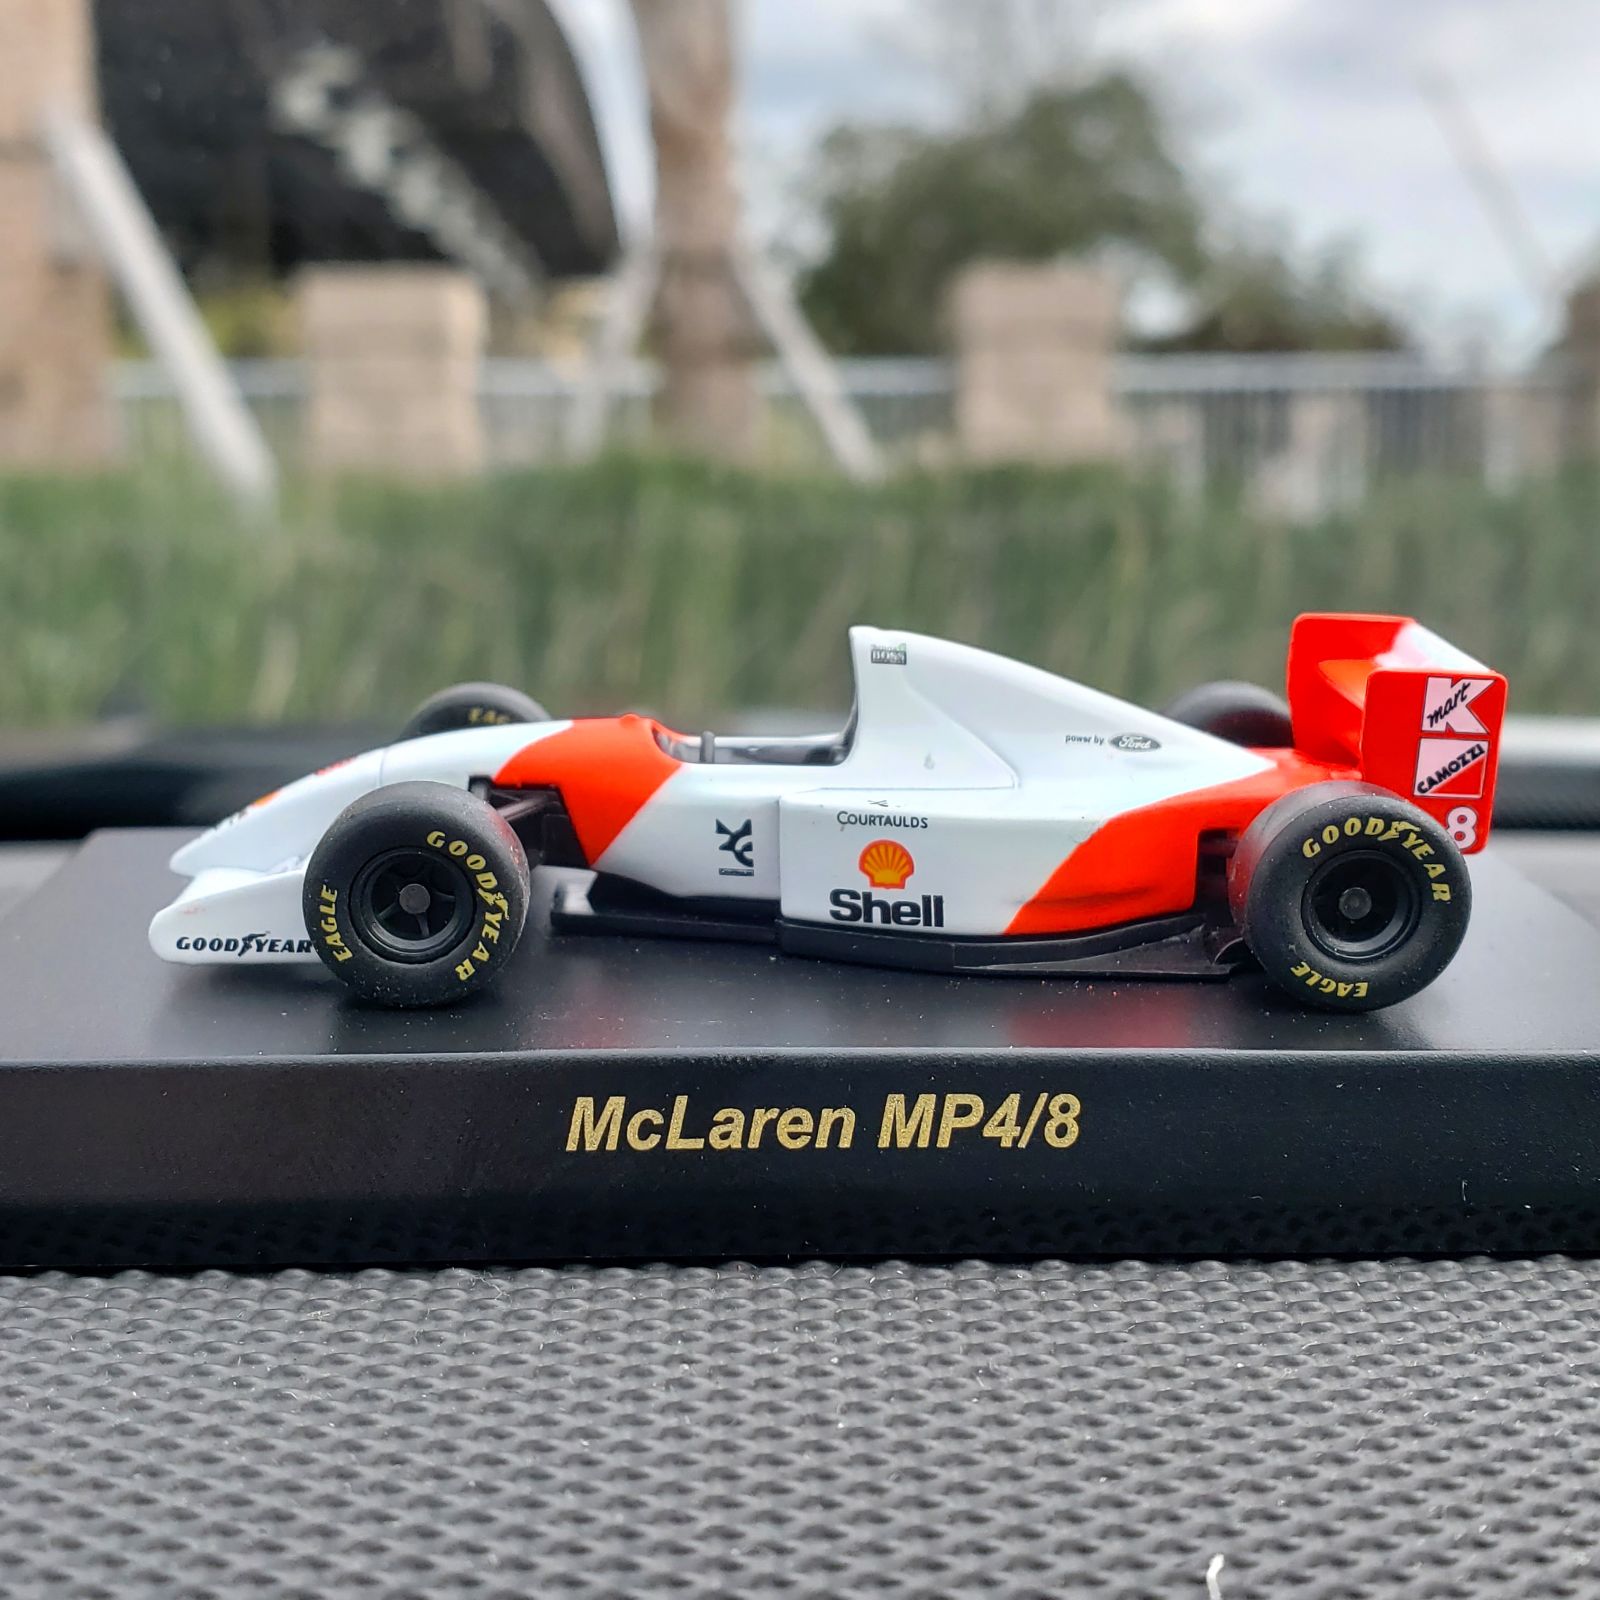 Illustration for article titled McLaren MP4/8: My first Kyosho purchaseem/em